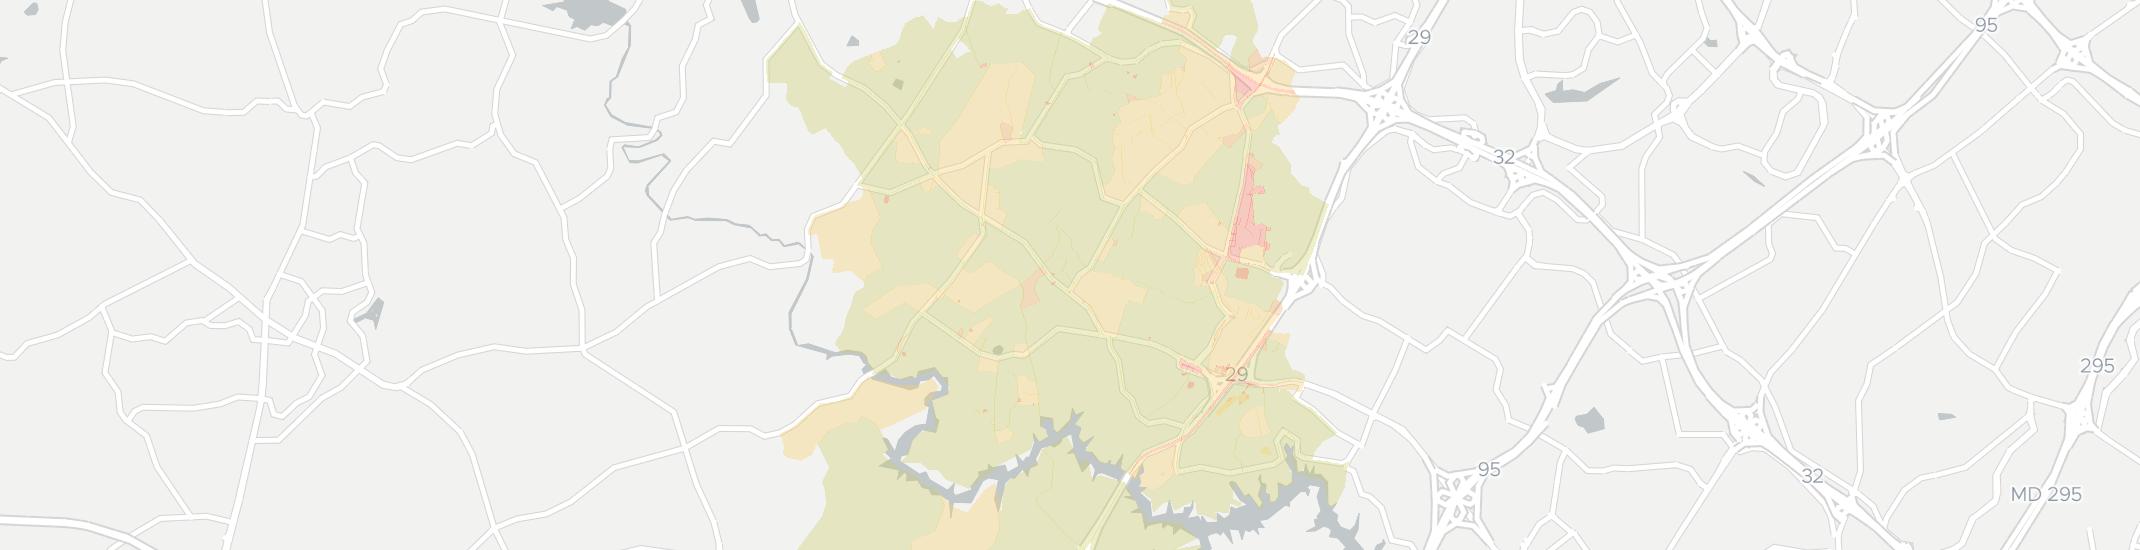 Fulton Internet Competition Map. Click for interactive map